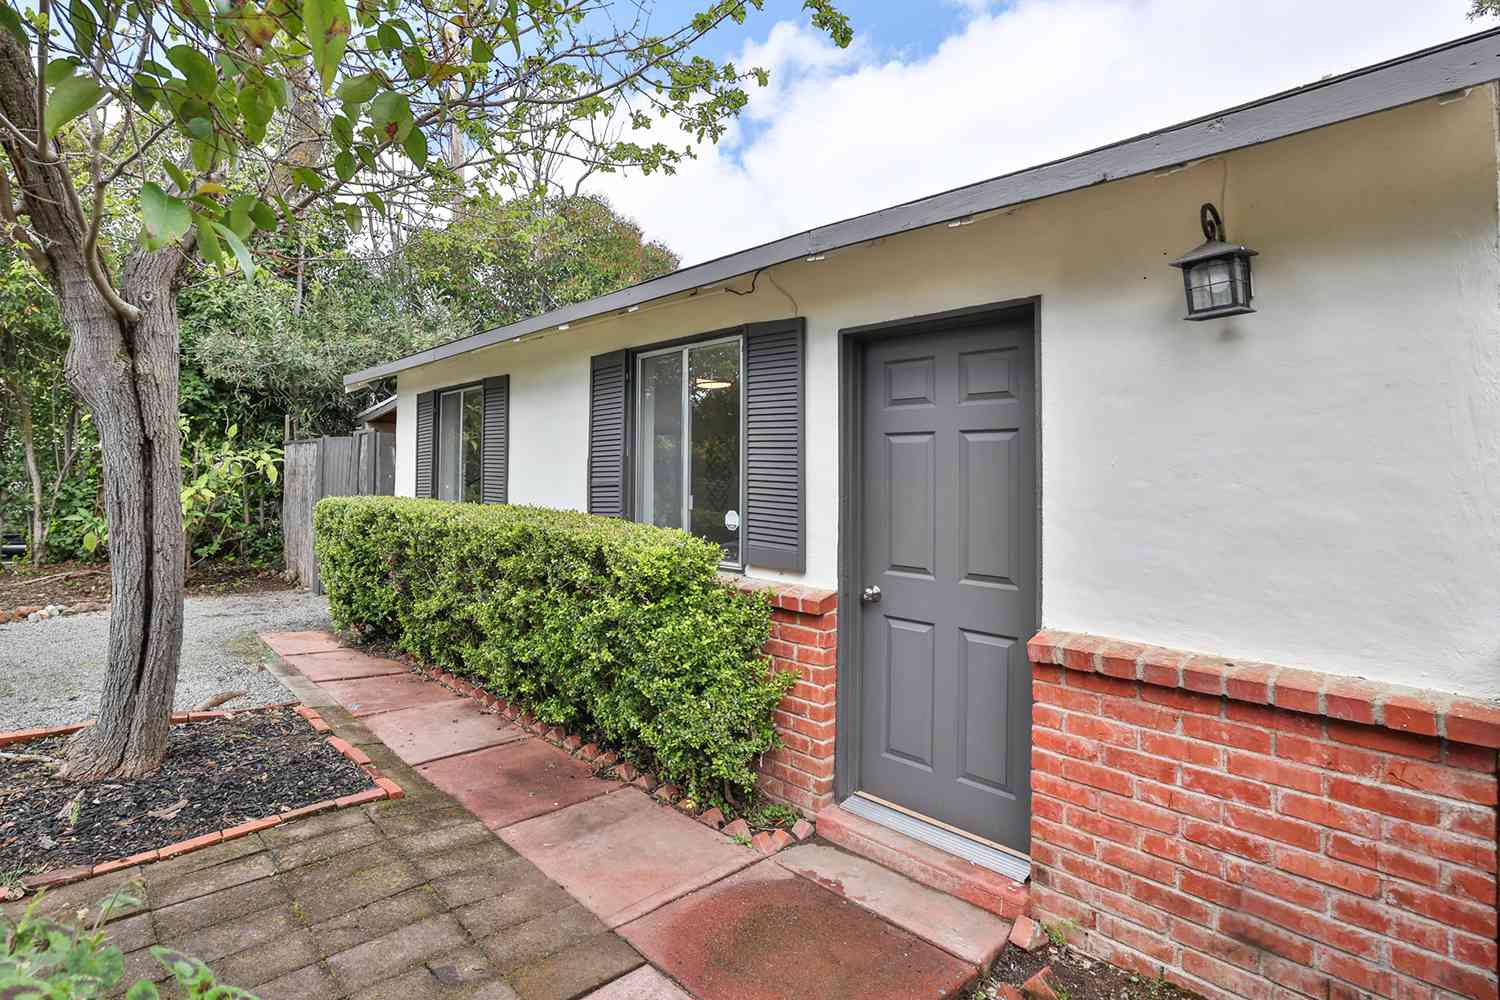 Tiny 384-Square-Foot Home in Cupertino Lists for $1.7 Million